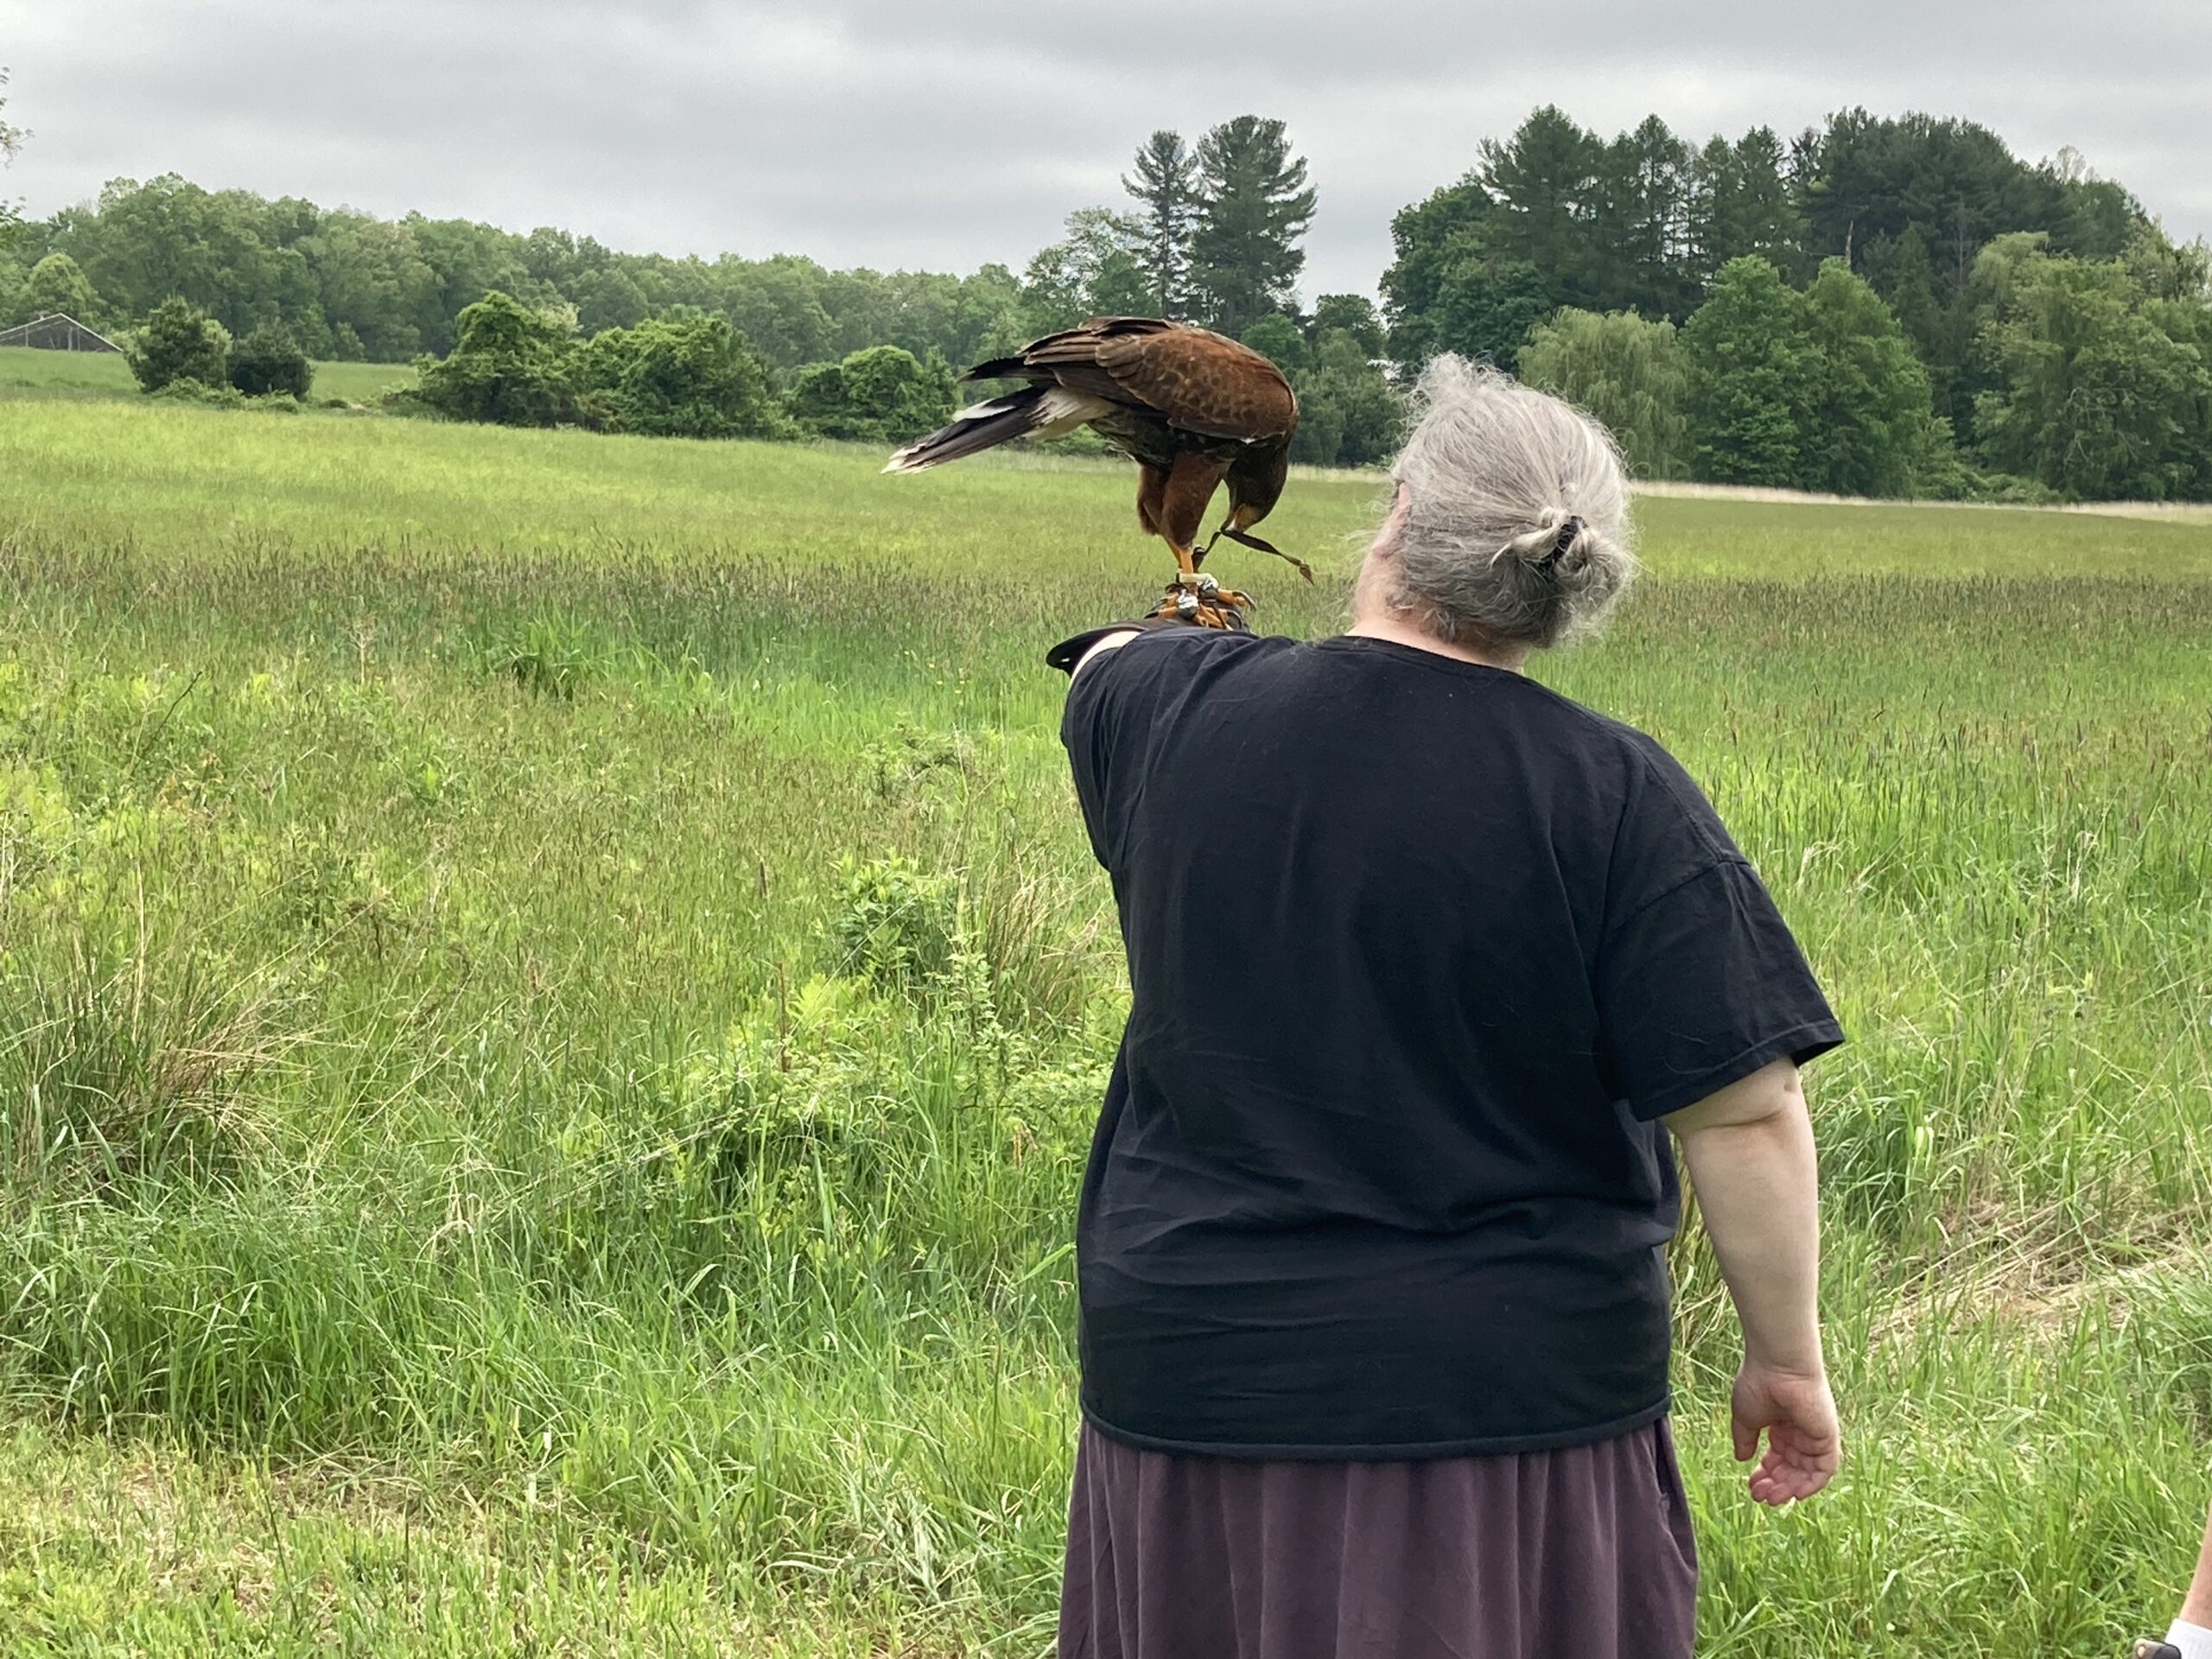 Harris's Hawk on my left (gloved) wrist, picking at his jesses. I am a silver haired larger woman in a black t-shirt and heathery purple skirt, standing in a large open field. 